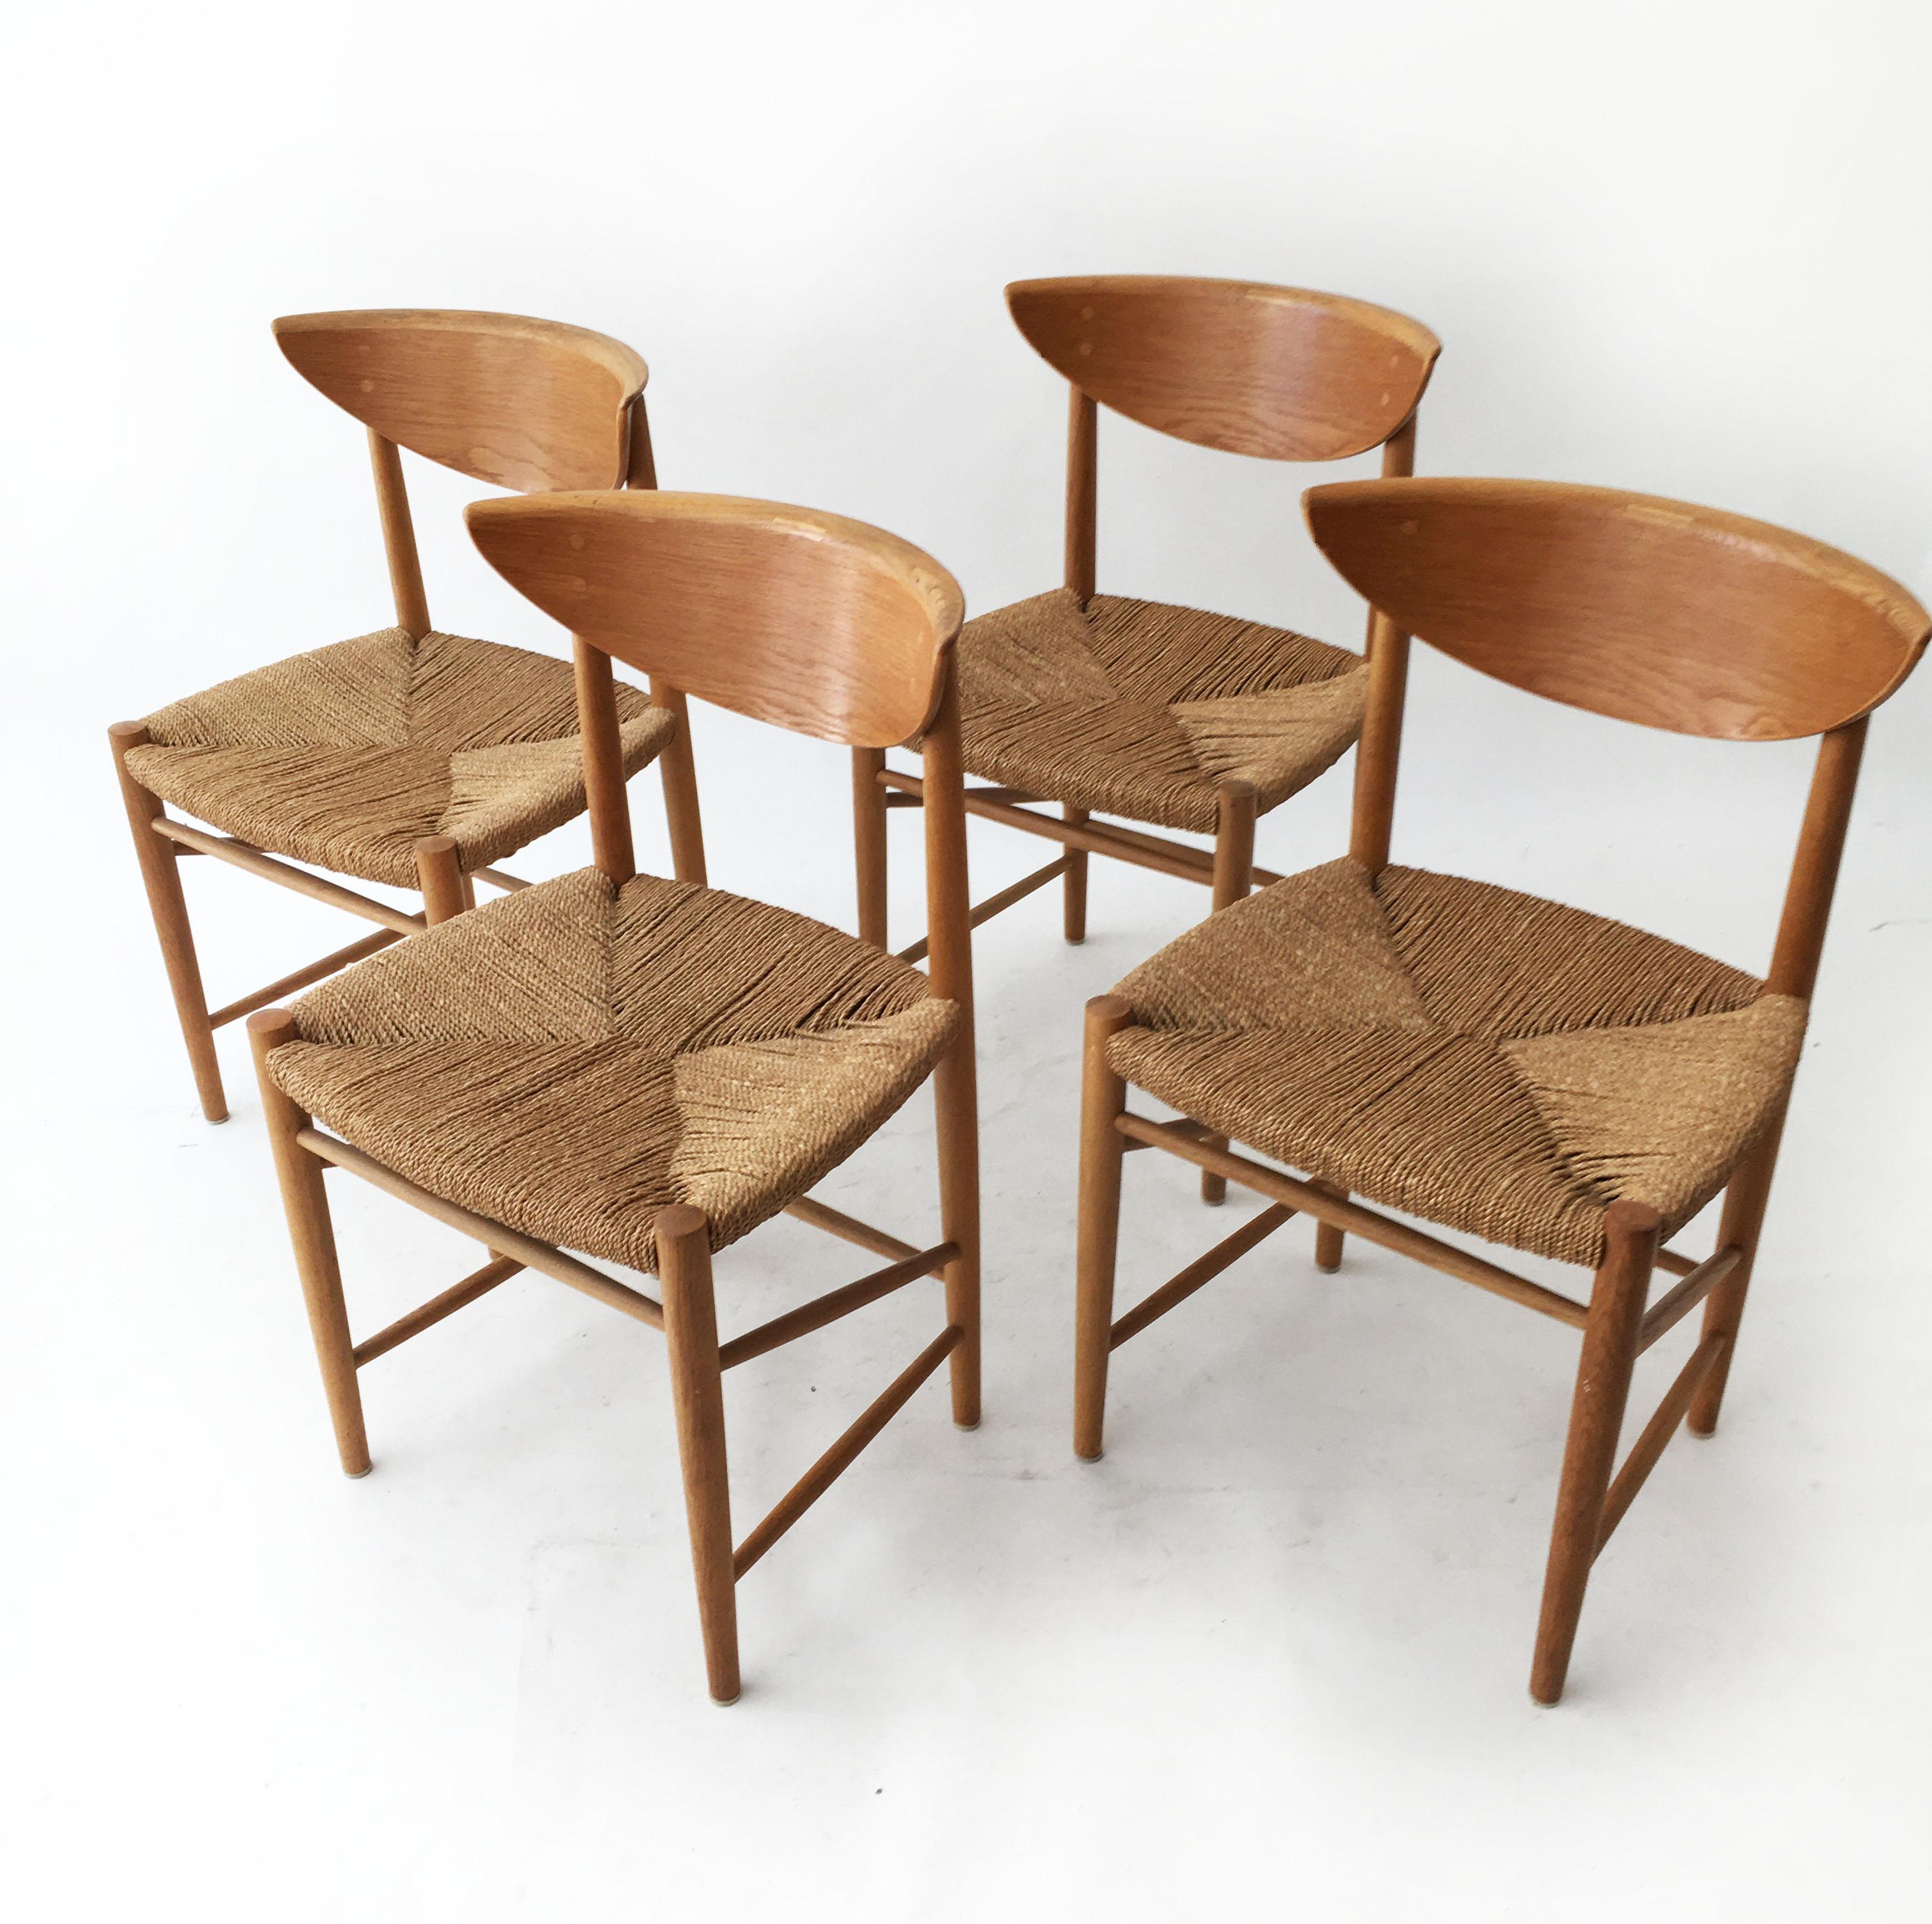 Hvidt and Molgaard-Nielsen set of four oak and cord chairs, Denmark, 1950s. The backrest is beautifully crafted and points to a nice bend for comfortable leaning, as well as an outwardly curved edge. The chairs retain the original woven cord in very